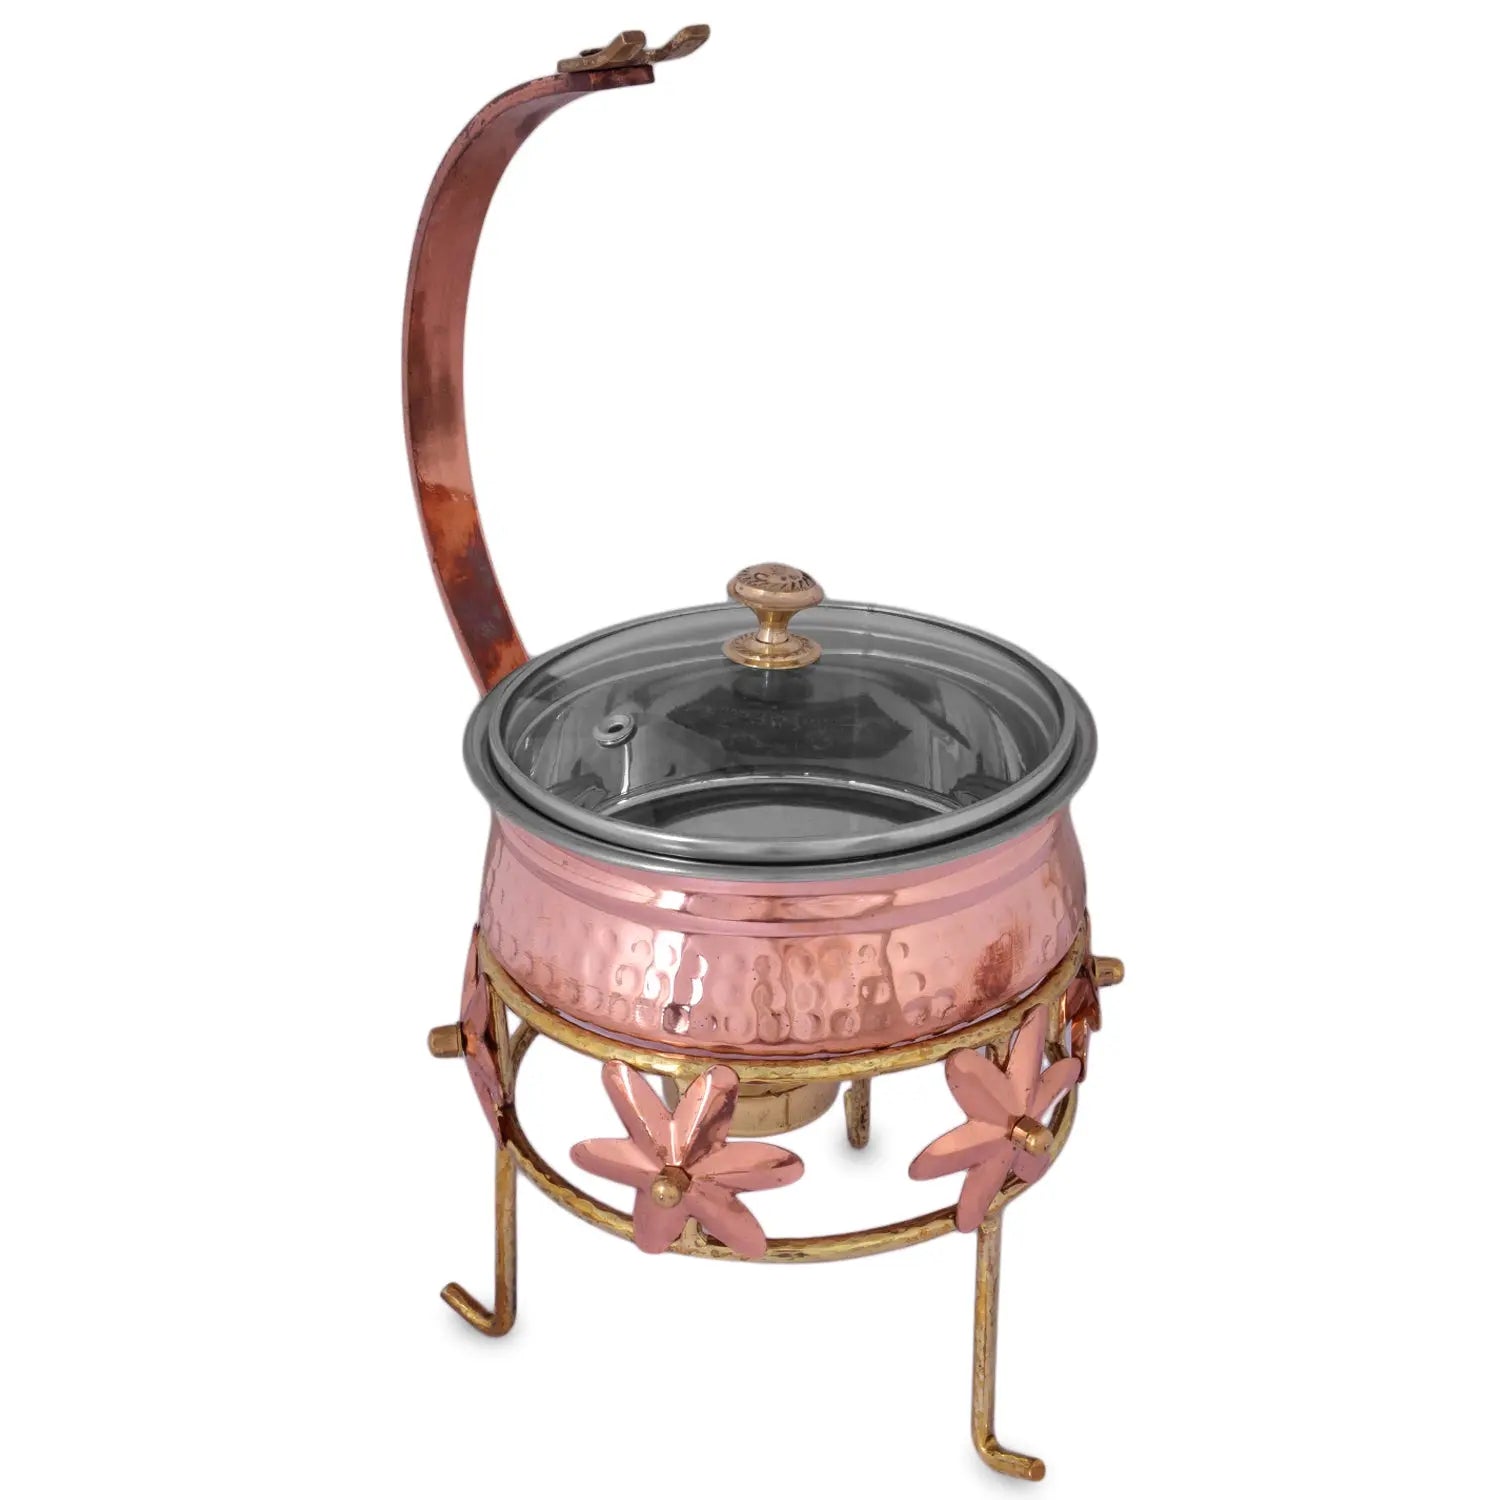 Crockery Wala And Company Copper Steel Hammered Chaffing Dish Copper Serveware With Lid & Brass Stand - CROCKERY WALA AND COMPANY 